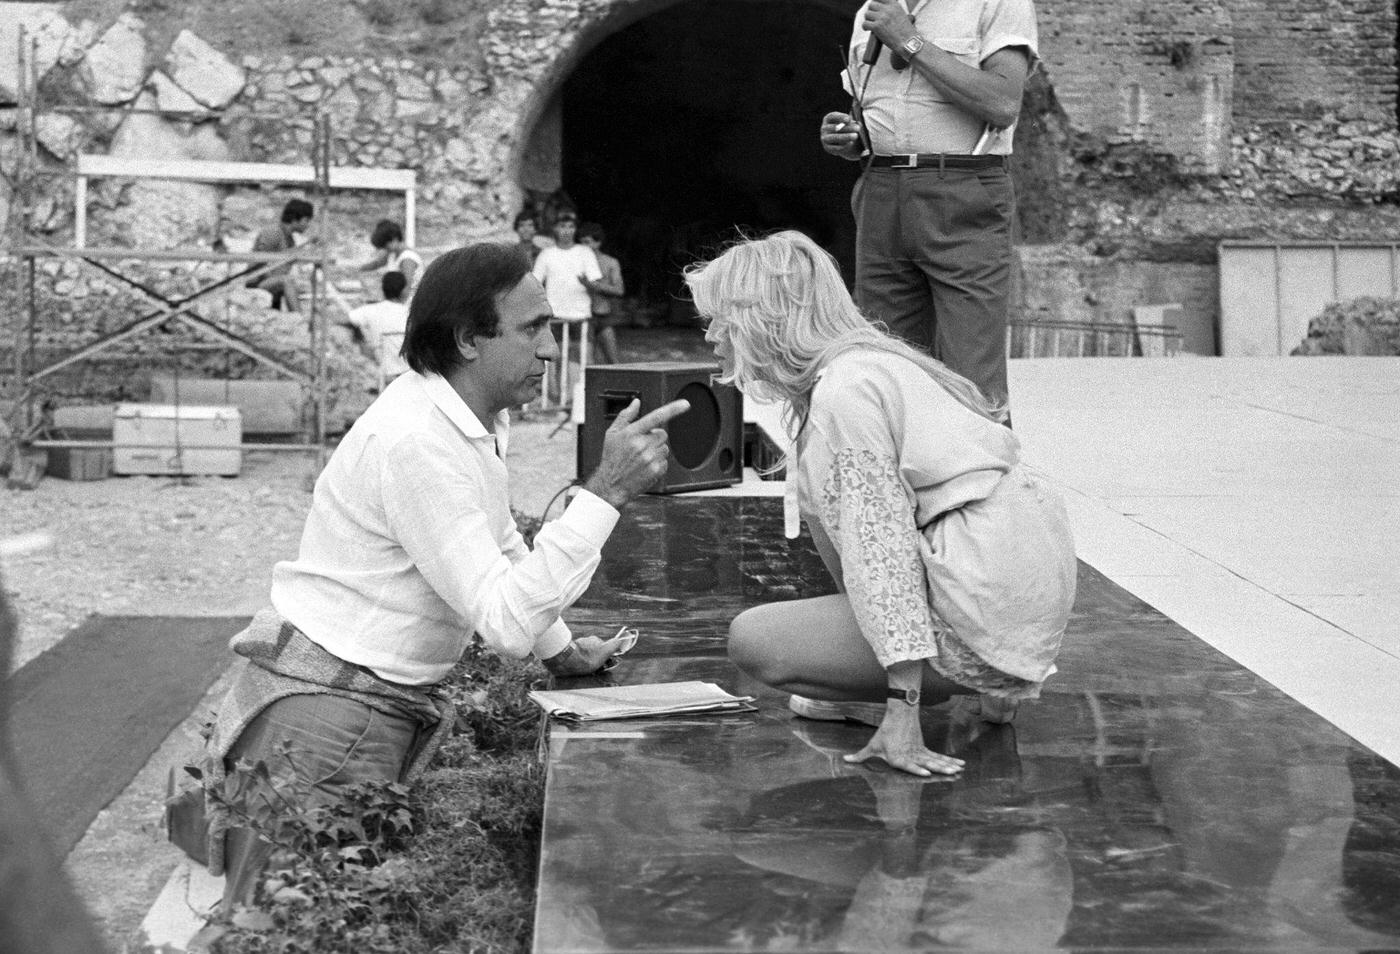 Pippo Baudo and Heather Parisi rehearsing for the Nastri d'Argento ceremony at the Ancient Theatre of Taormina, 1984.